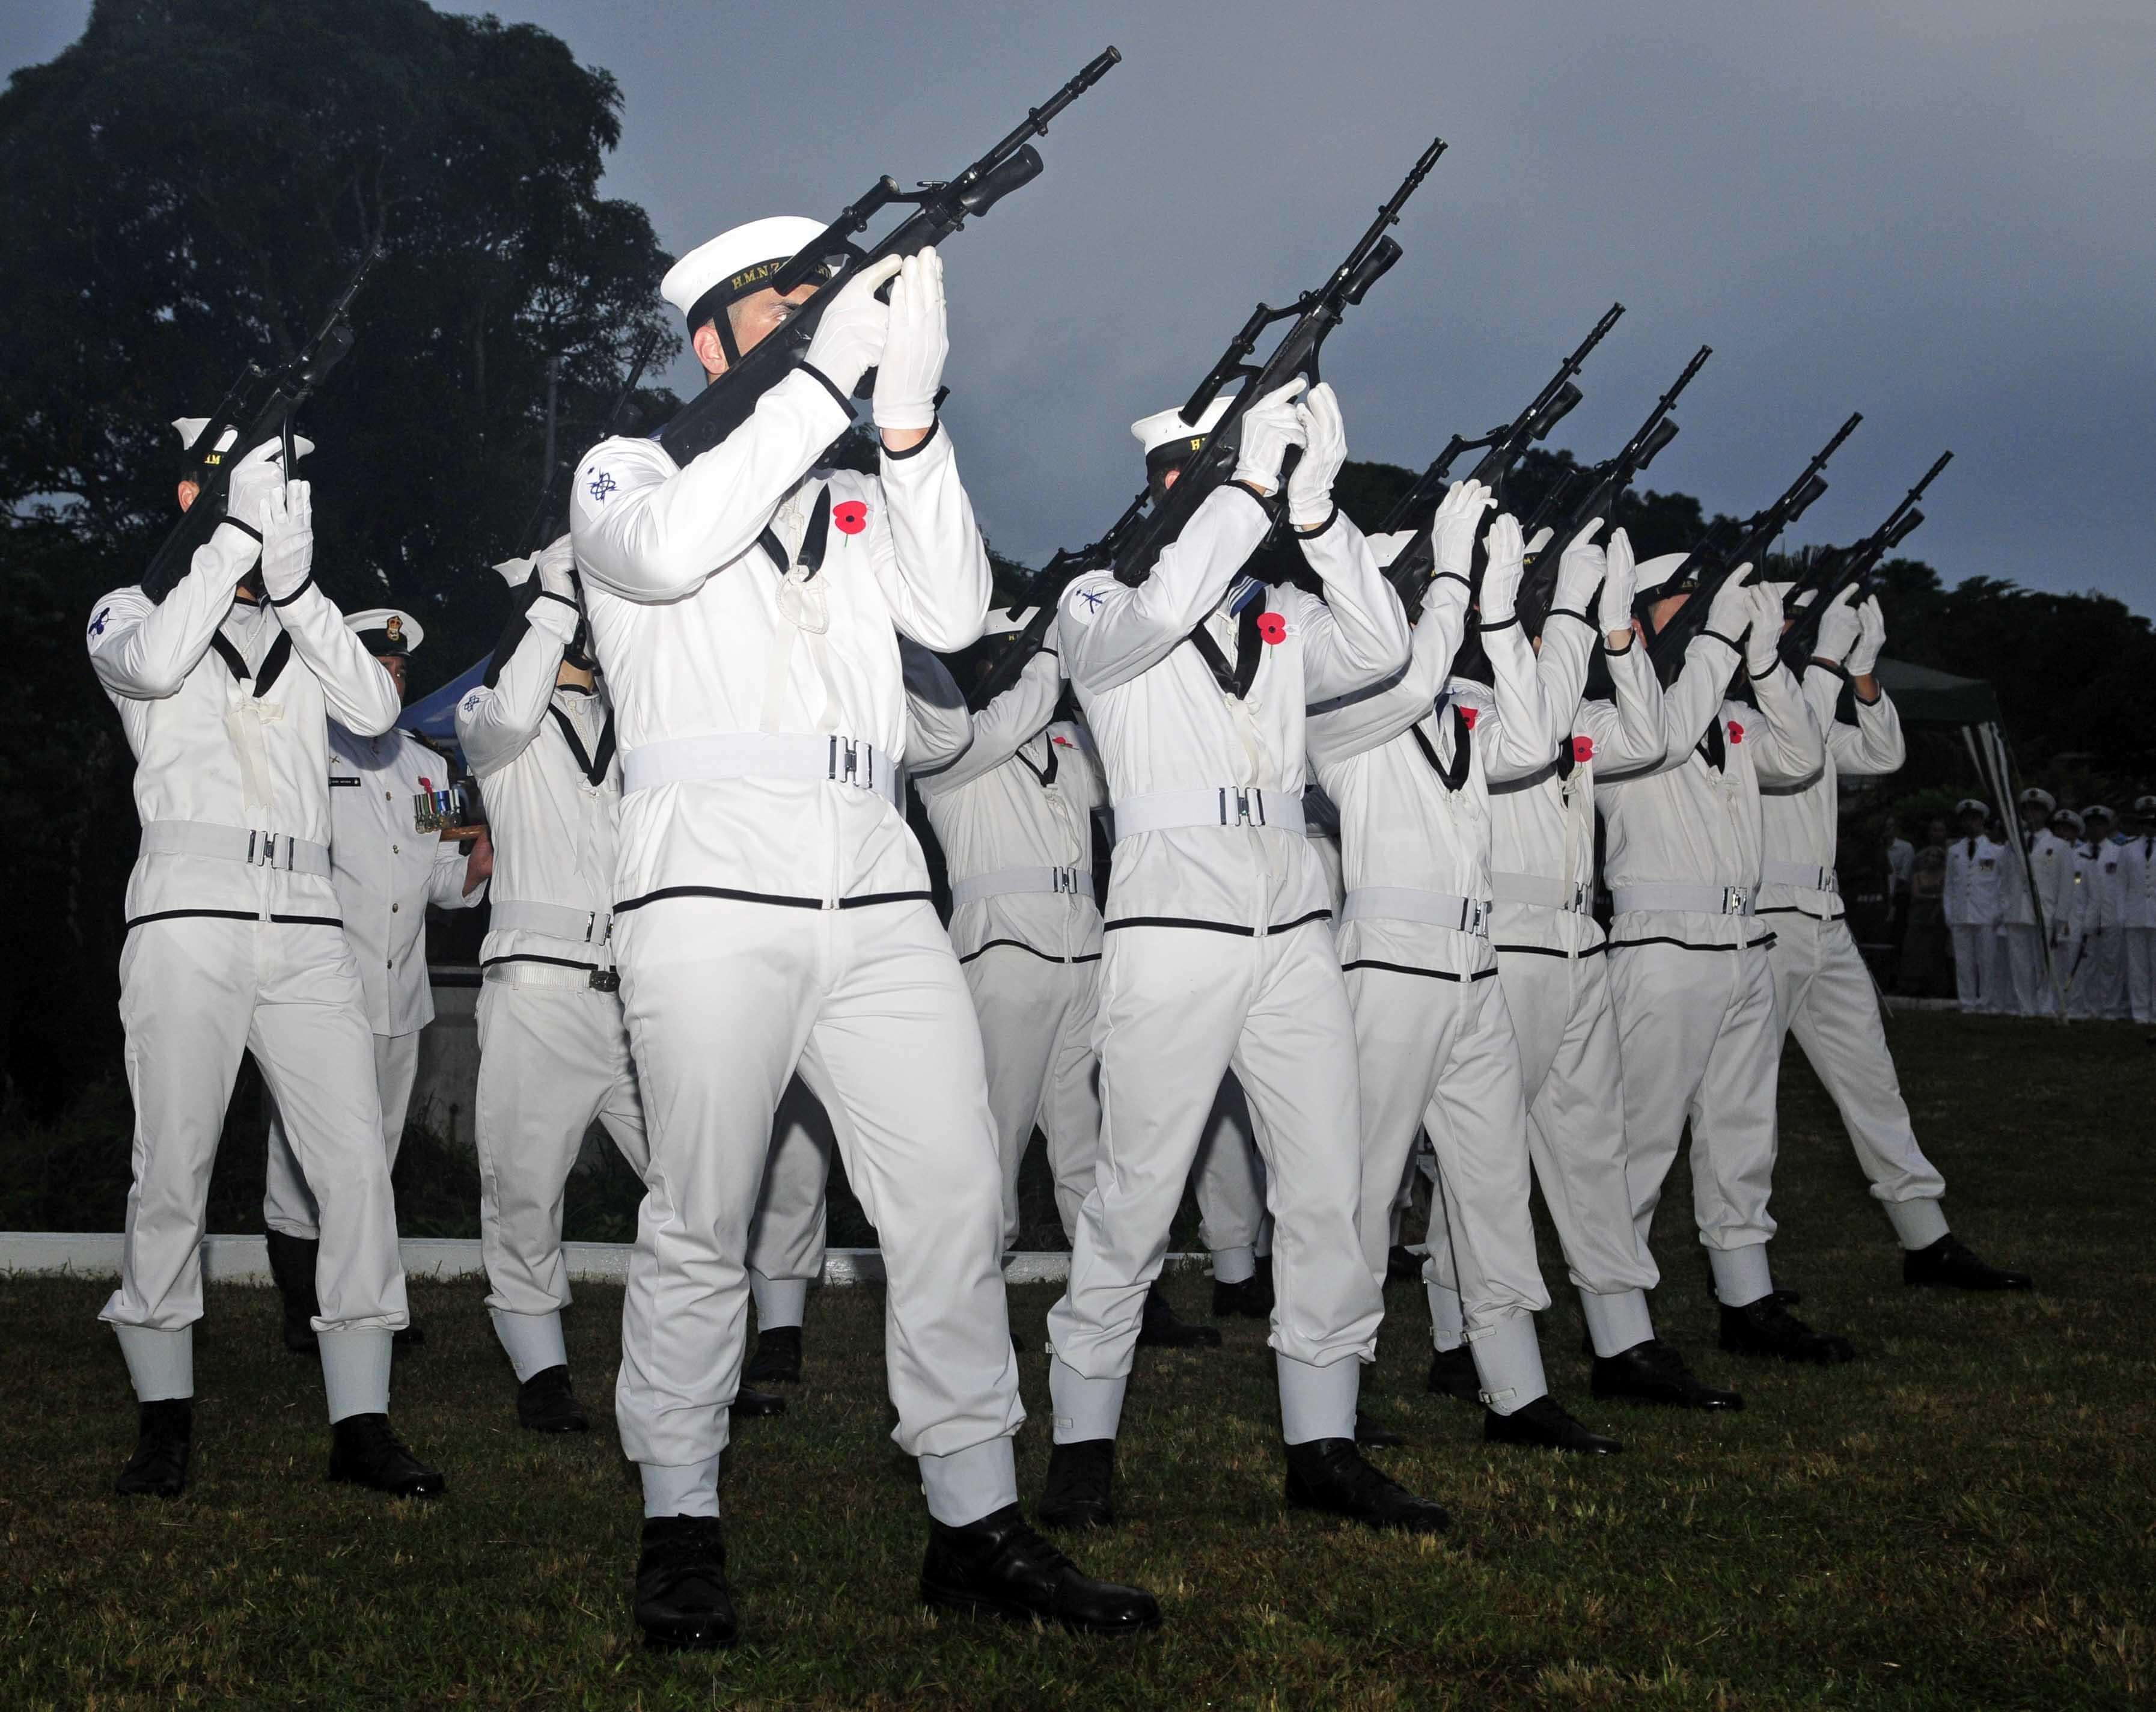 Sailors with the Royal New Zealand Navy render a gun salute during an Australian New Zealand Army Core Day celebration in 2011- US department of defense